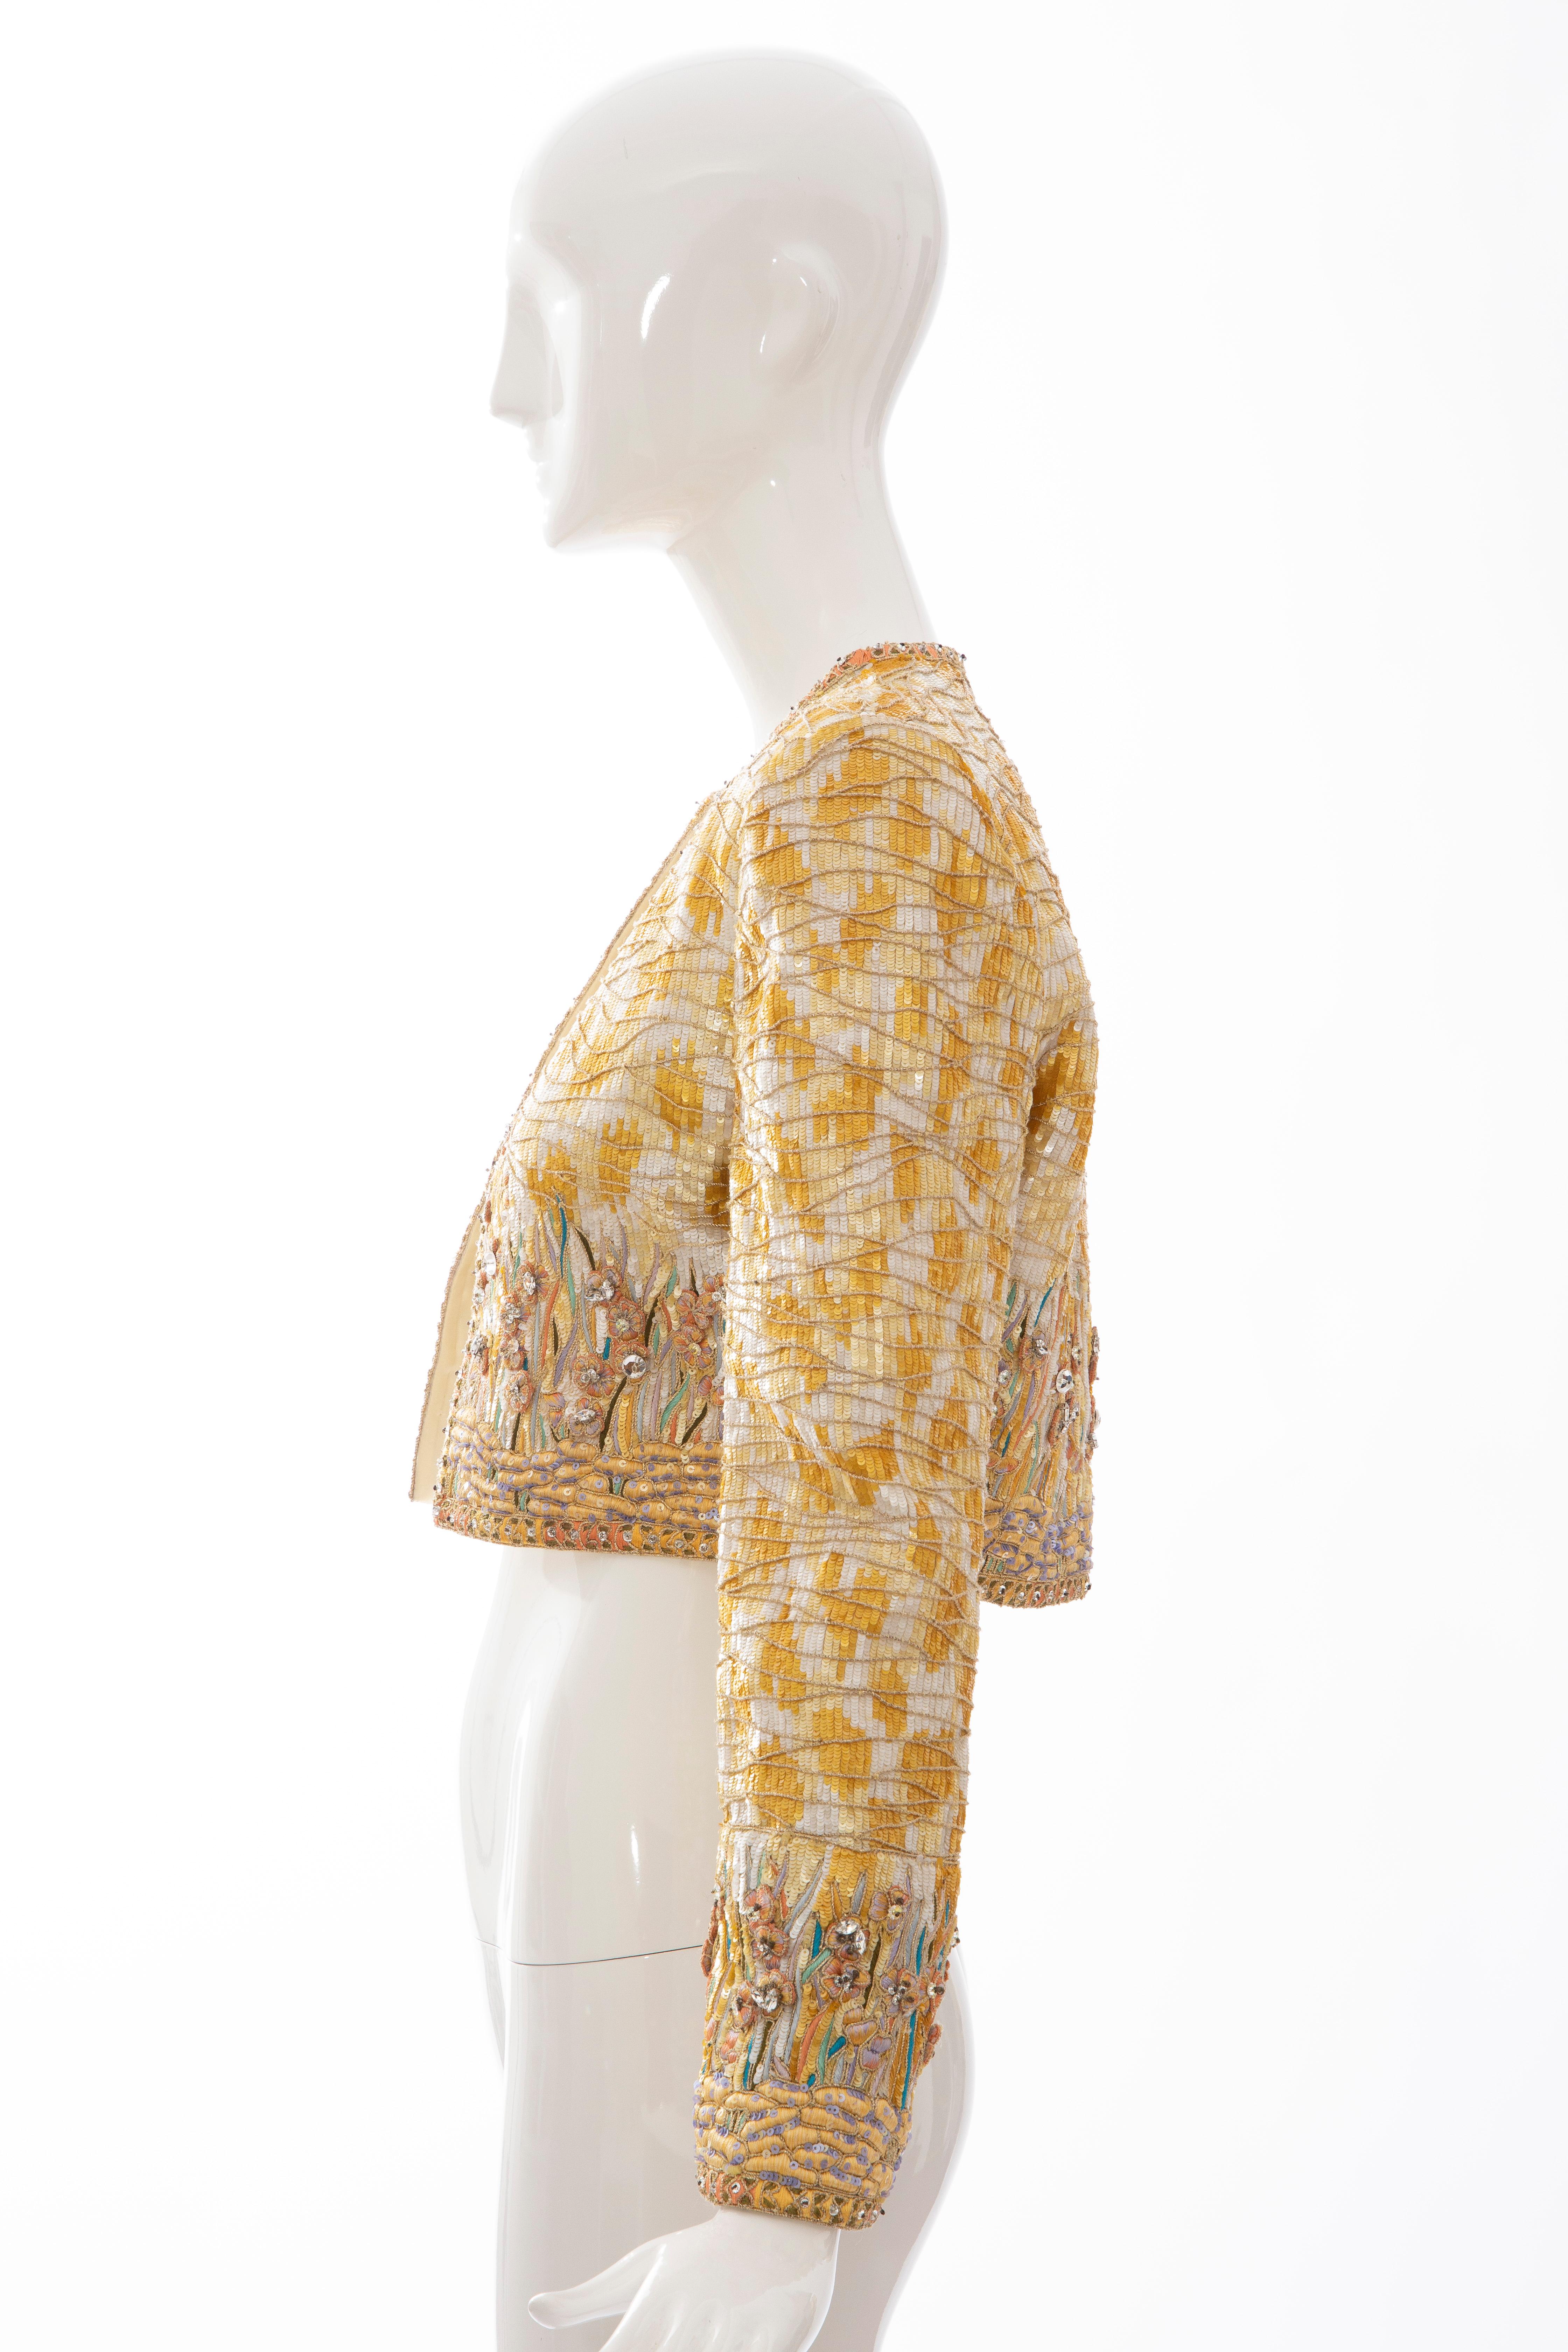 Mary McFadden Couture Silk Embroidered Sequins Diamanté Bolero Jacket, ca. 1980's For Sale 4